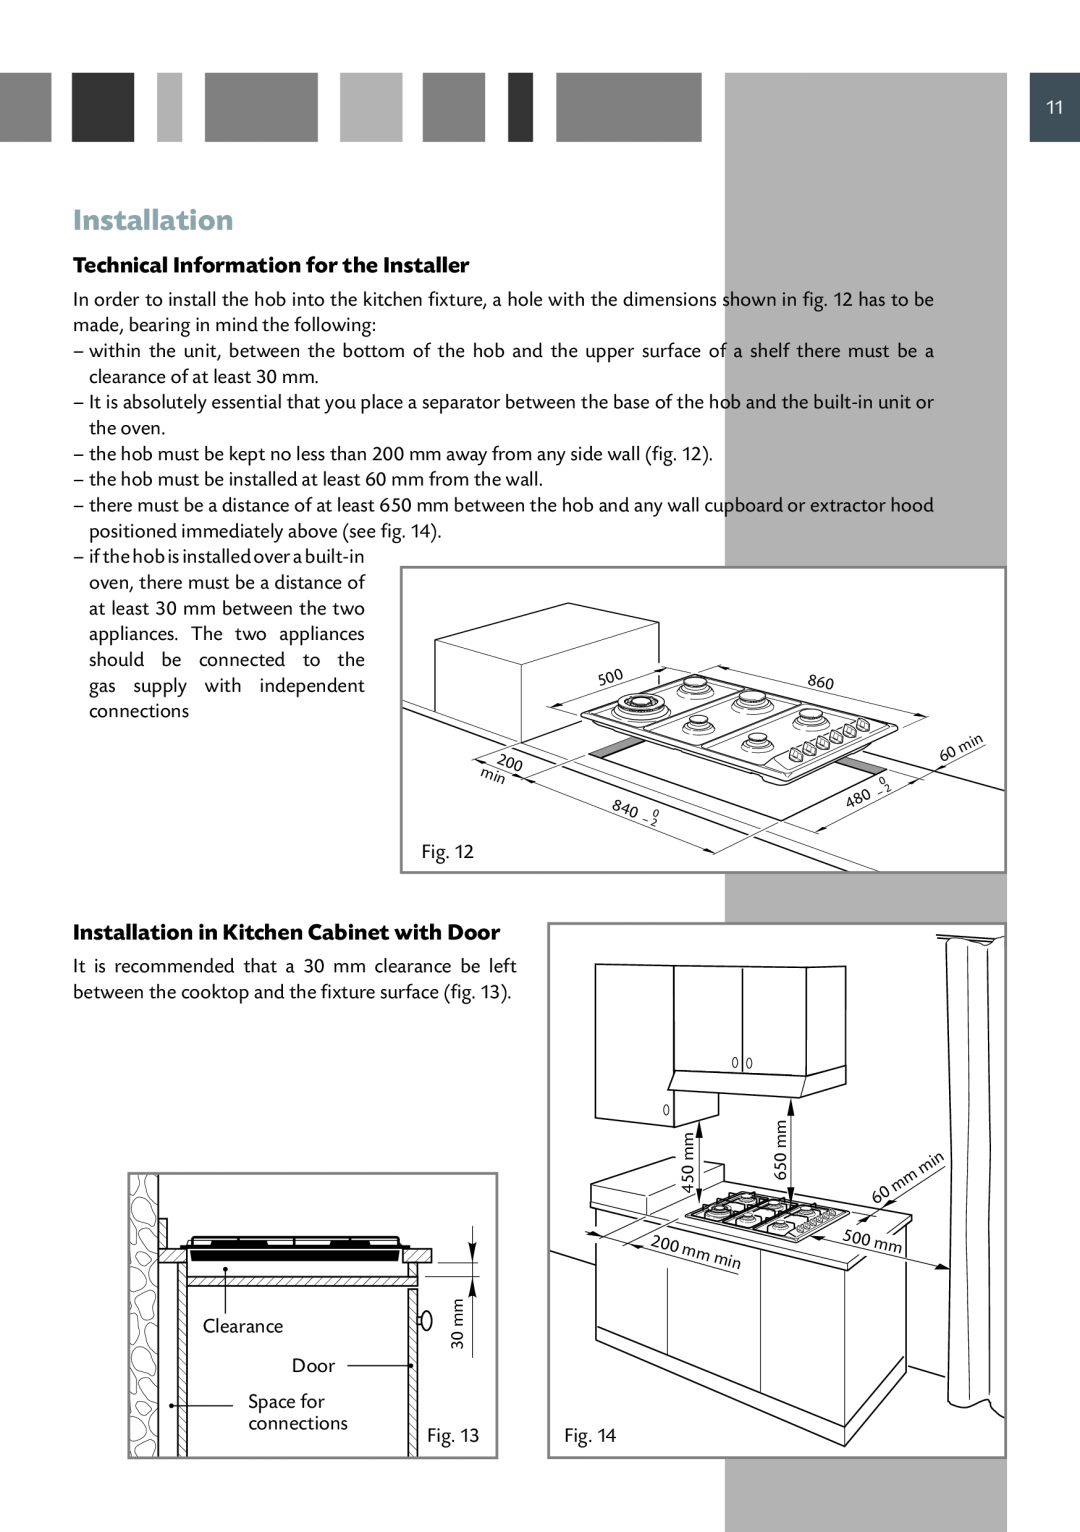 CDA HCG 931 manual Technical Information for the Installer, Installation in Kitchen Cabinet with Door 